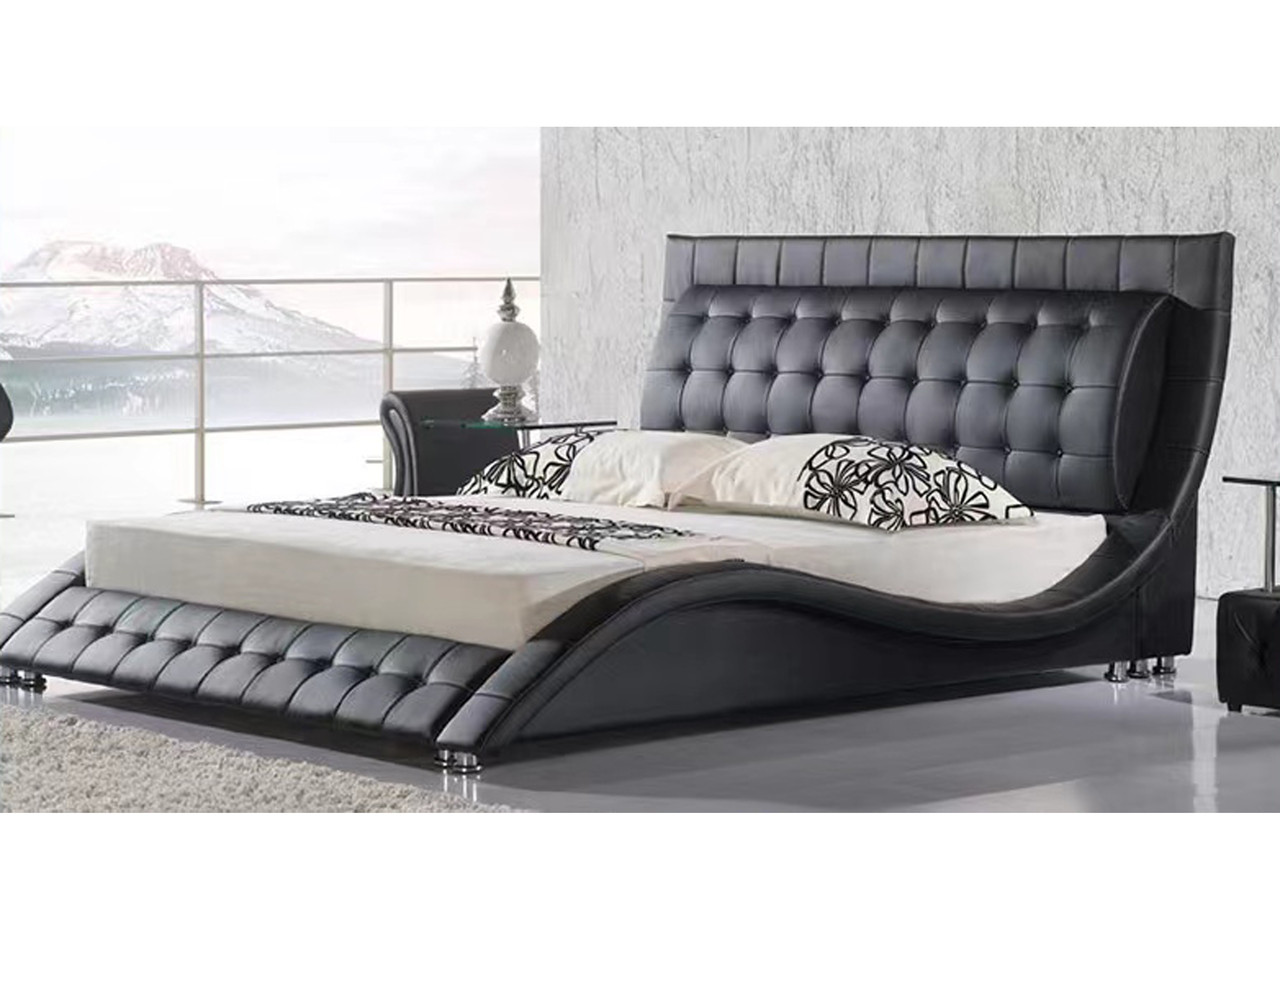 The Benefits Of Investing In A Sturdy King Size Bed Frame - My Furniture  Store - Furniture and Bedding Super Store - Australia